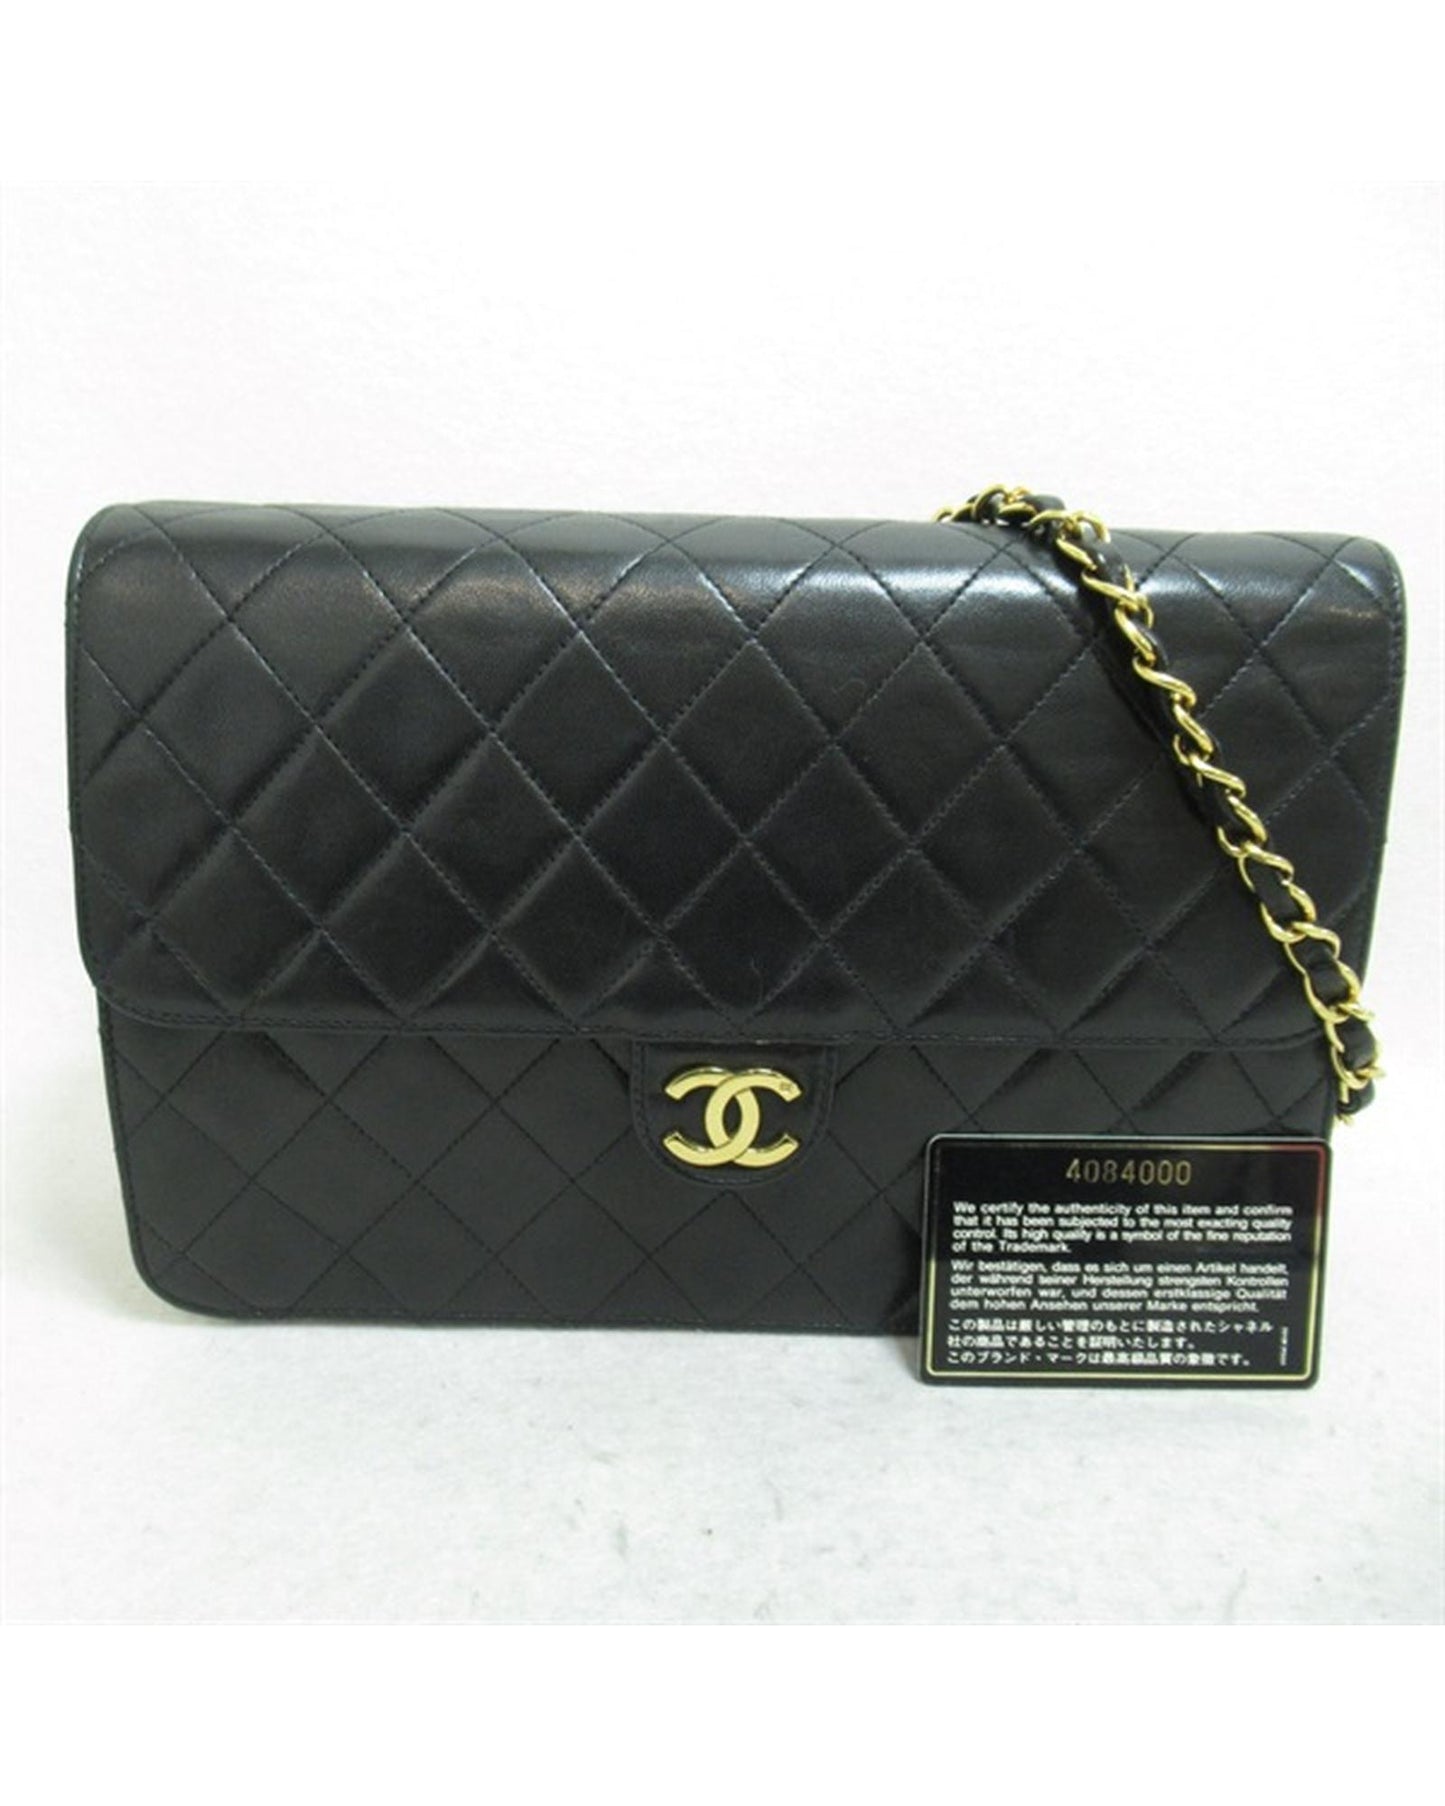 Chanel Women's Black Chanel Medium Classic Single Flap Bag in Excellent Condition in Black